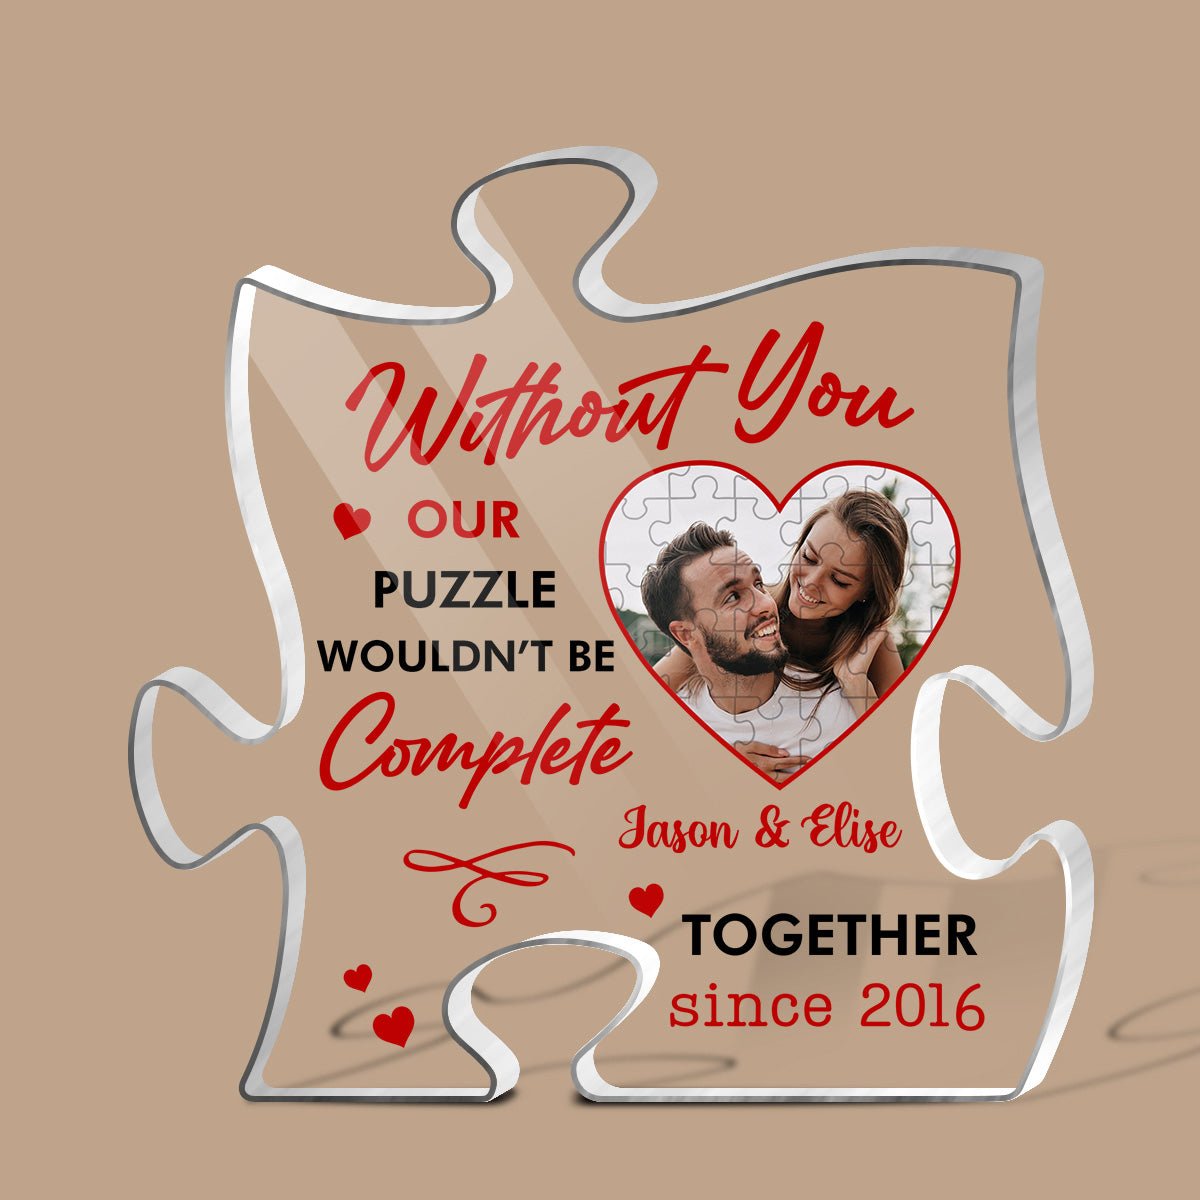 Without You Our Puzzle Wouldn't Be Complete 02 - Personalized Puzzle Plaque - Giftago